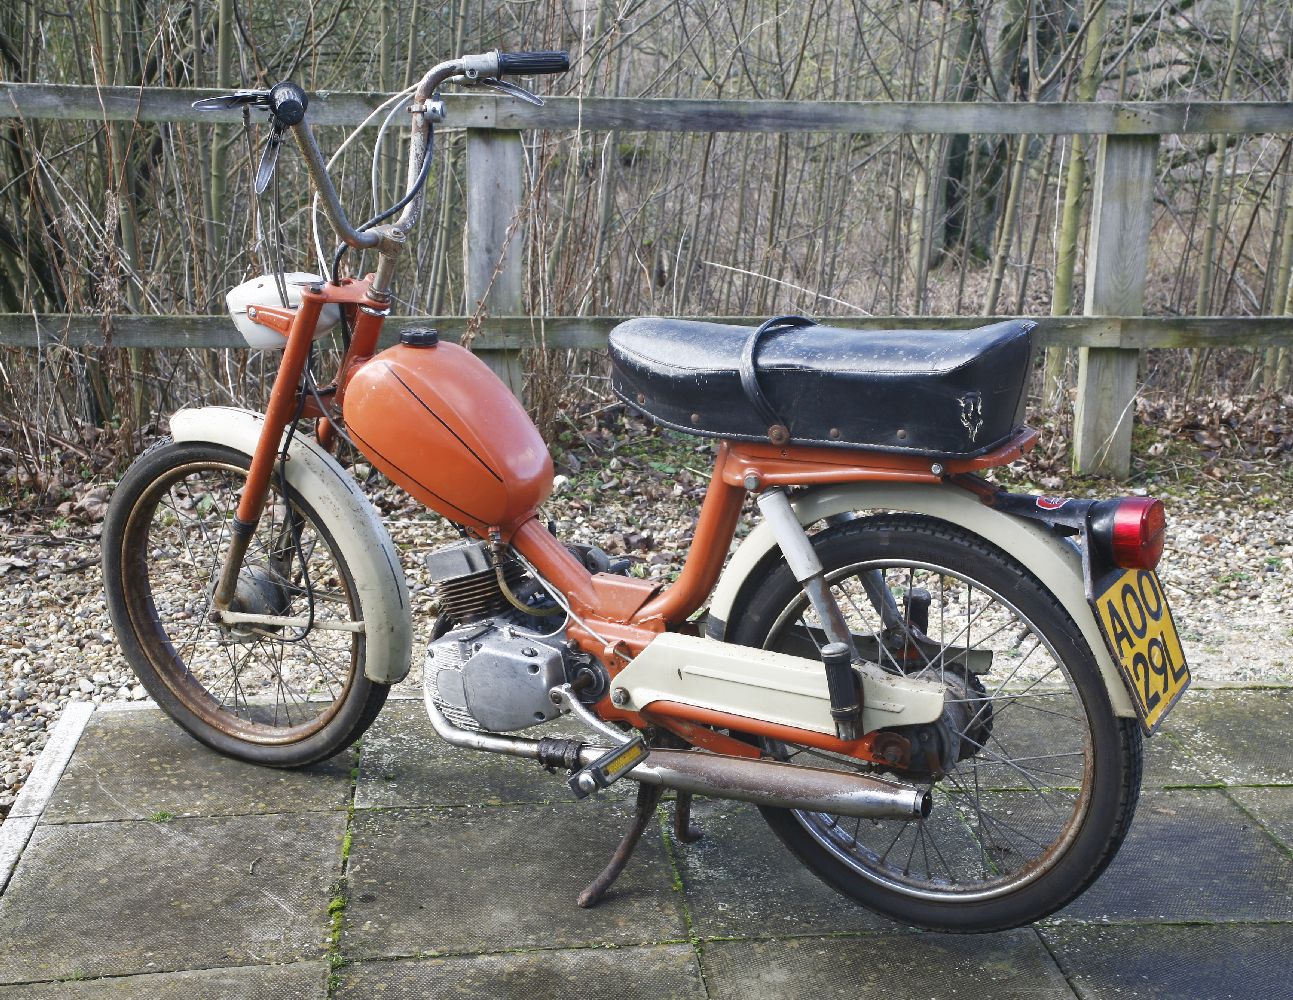 A 1973 Garelli 49cc pedal moped,first registered 30th April 1973, registration number AOO 129LHas